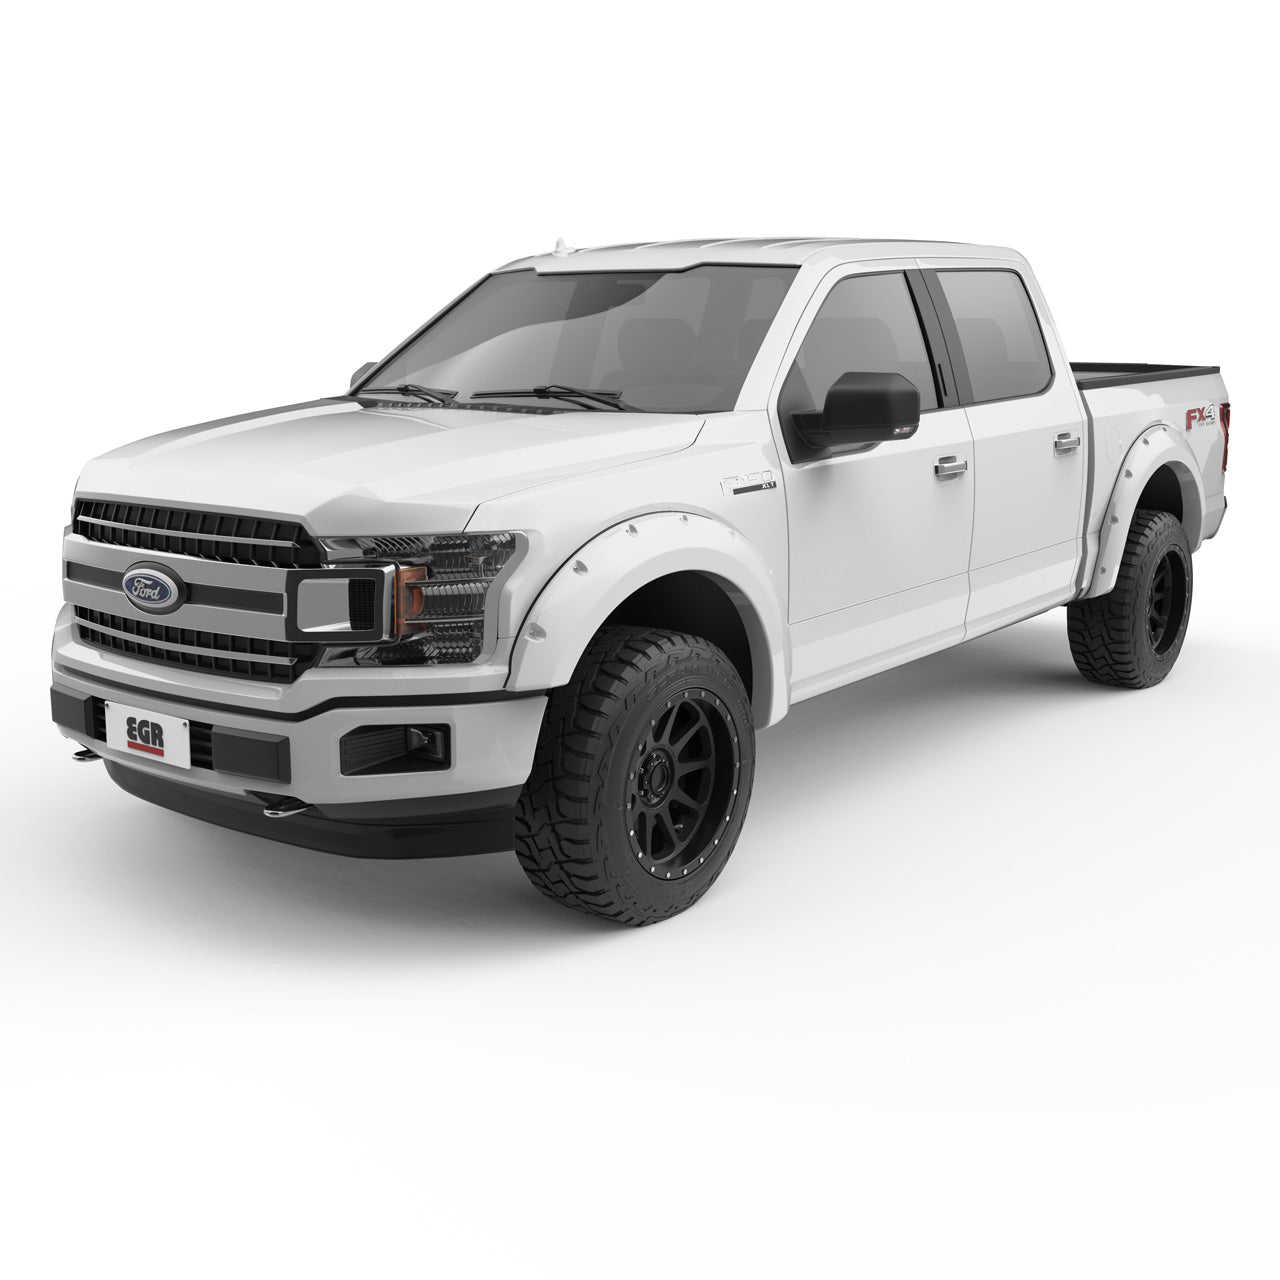 EGR Traditional Bolt-on look Fender Flares - 18-20 Ford F-150 non-Raptor Painted to Code Oxford White Set of 4